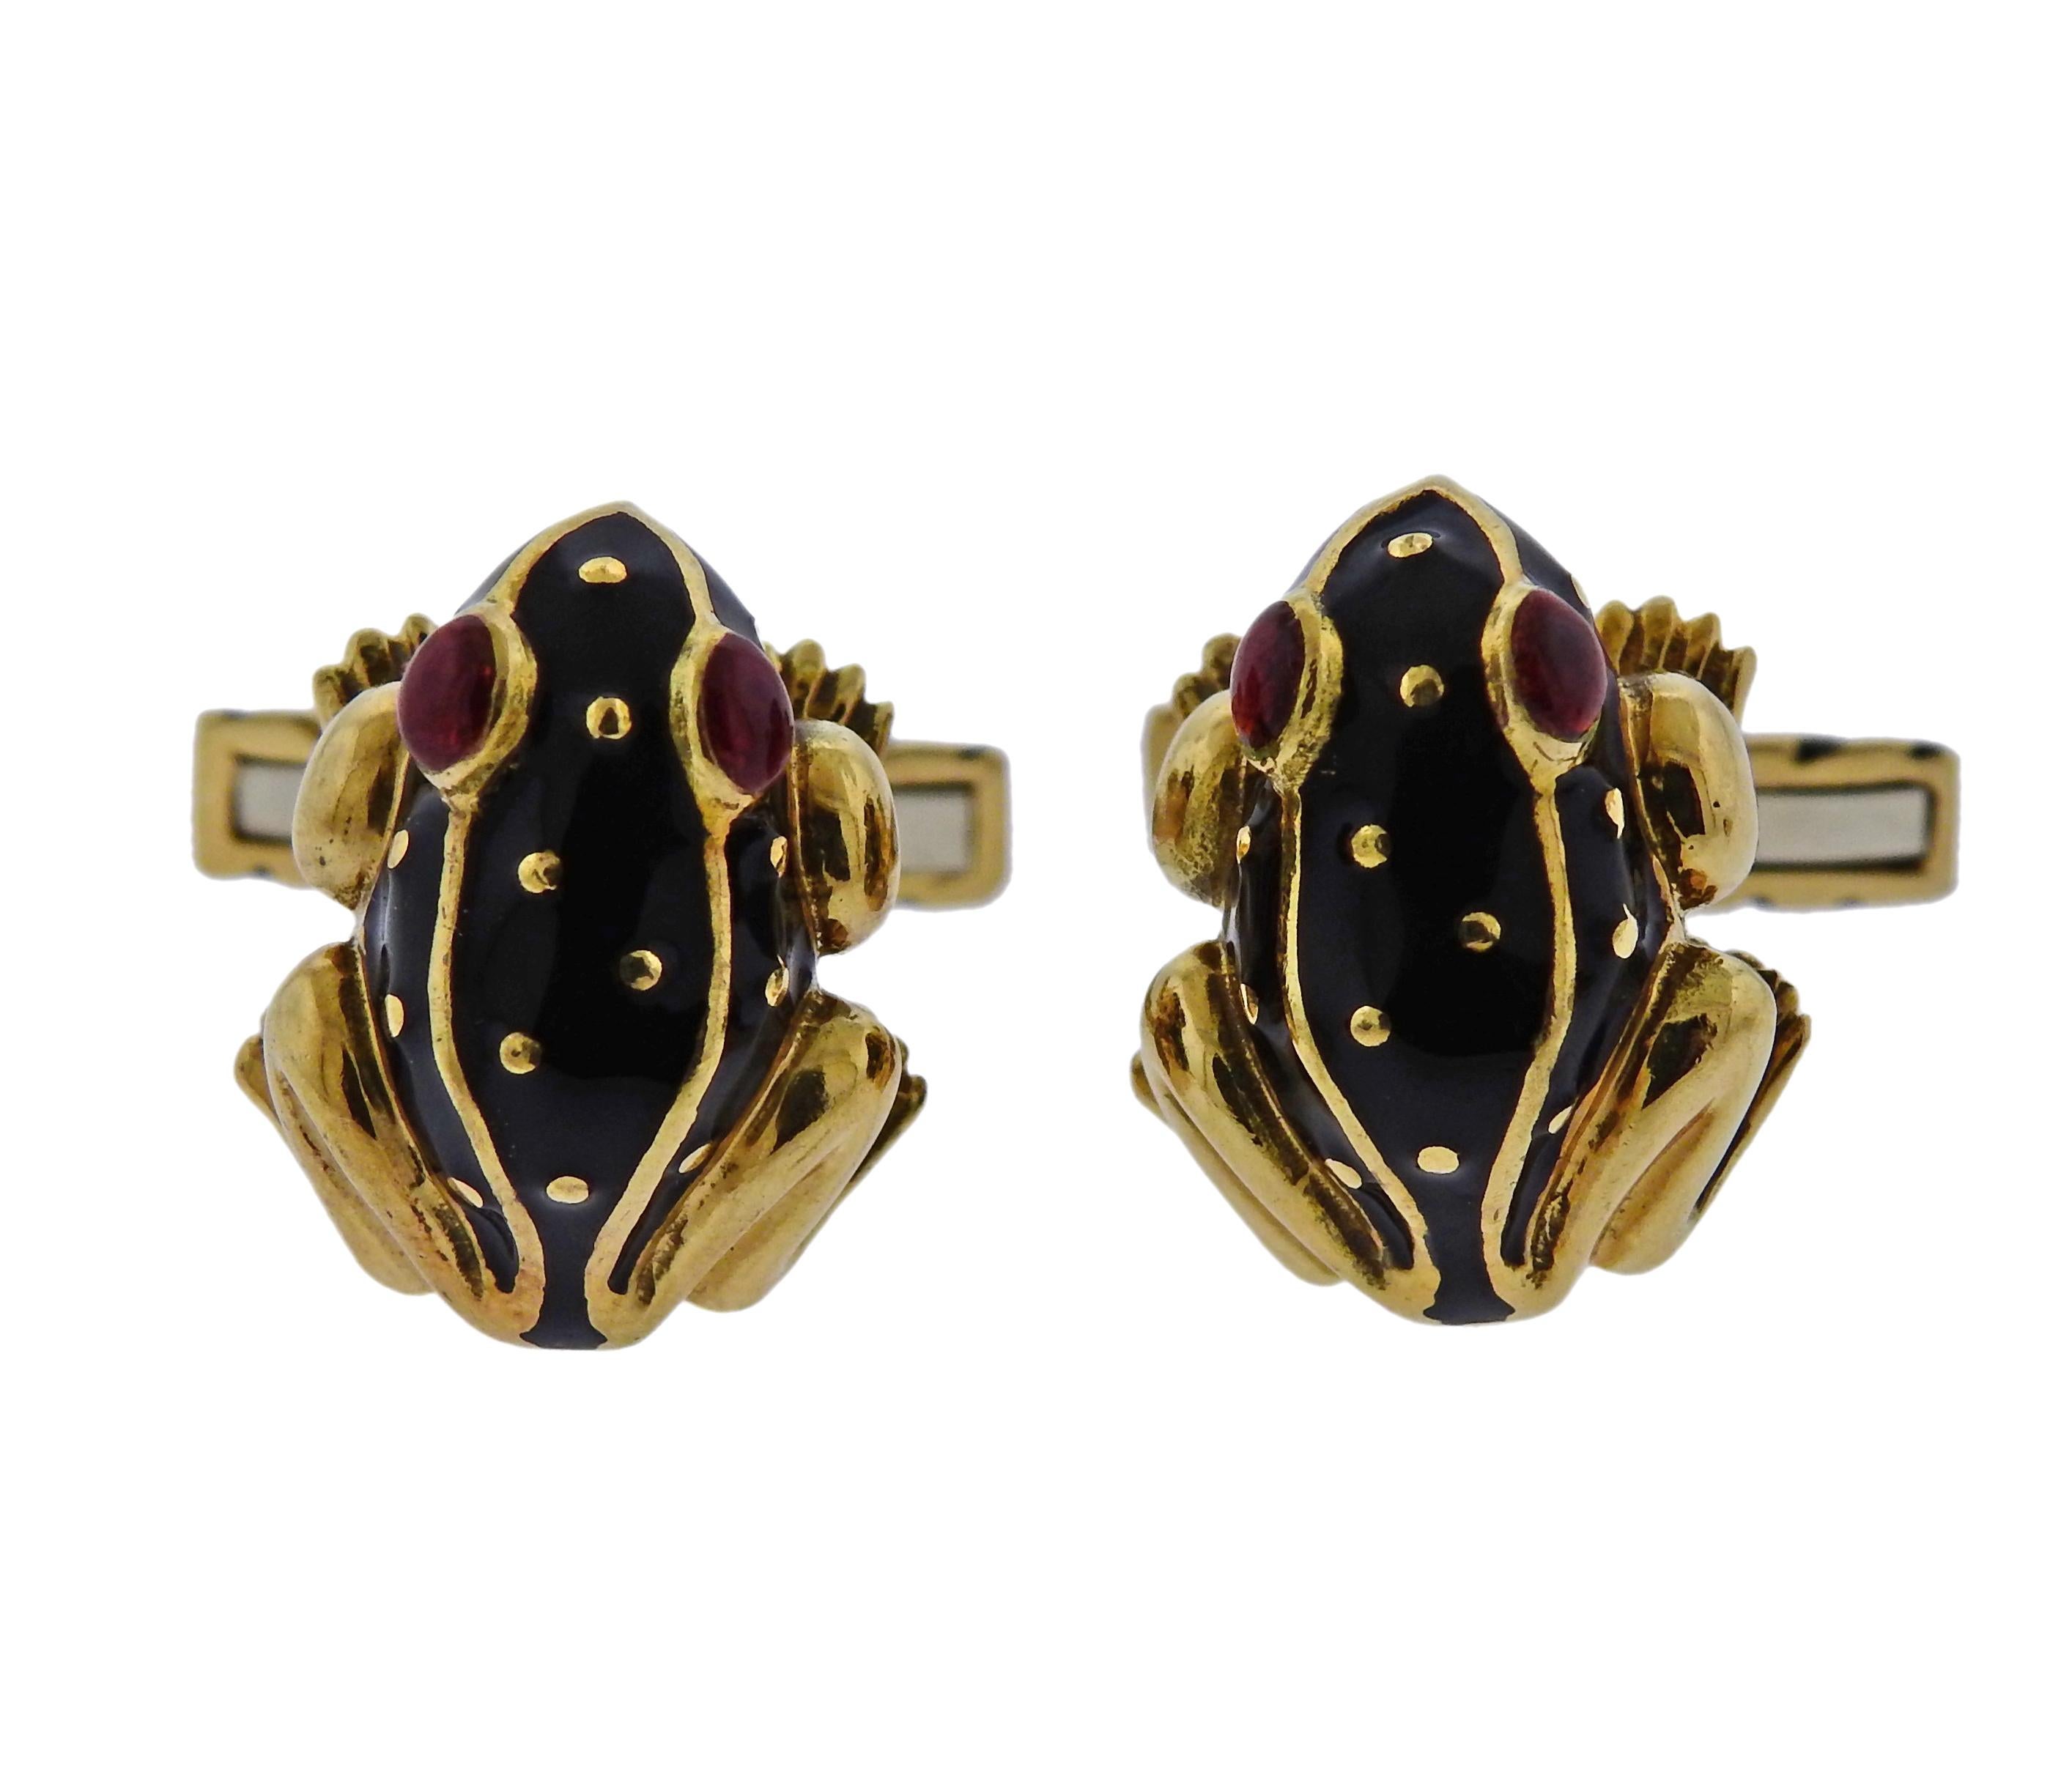 Pair of 18k yellow gold frog cufflinks and studs, decorated with multicolor enamel, crafted by David Webb. Cufflink measures 19mm x 15mm, stud top - 15mm x 9mm.  Marked Webb, 18k and weigh 34 grams total.